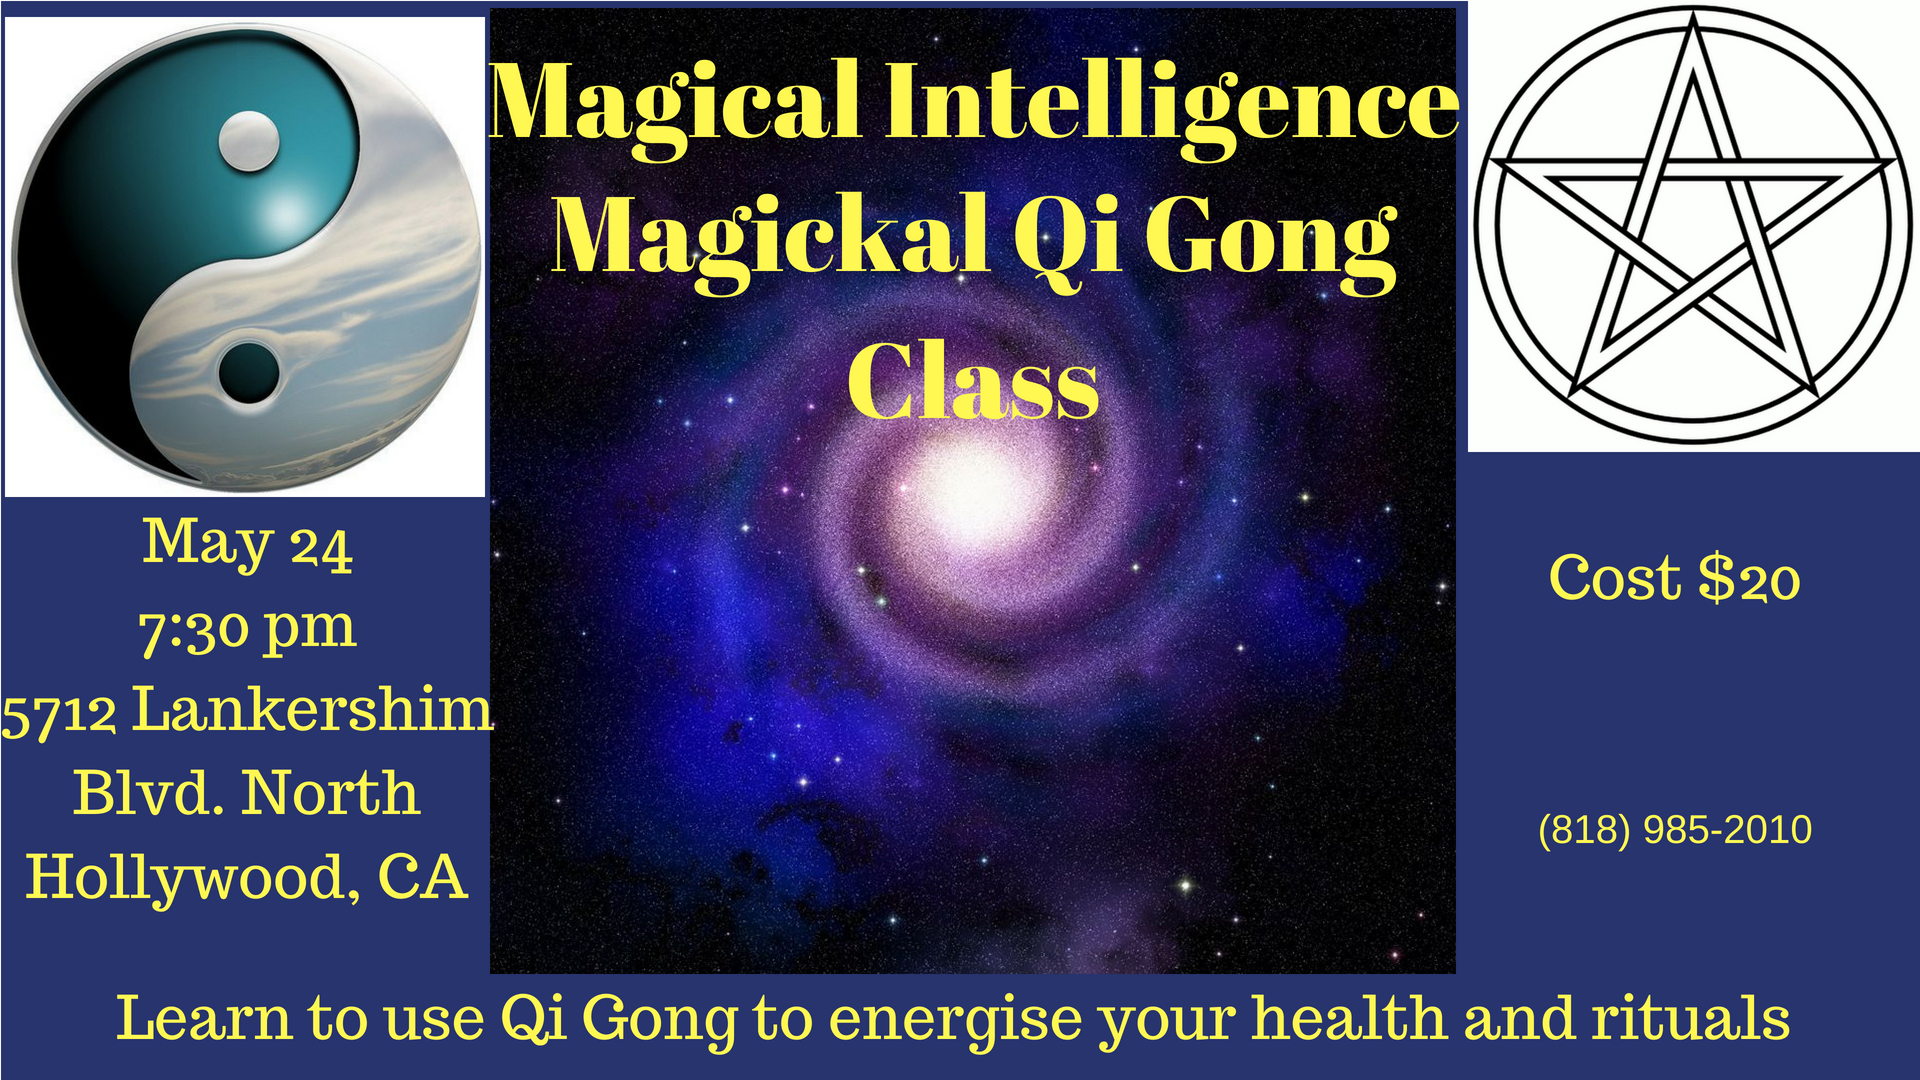 Magical Qi-Gong class Los Angeles flyer